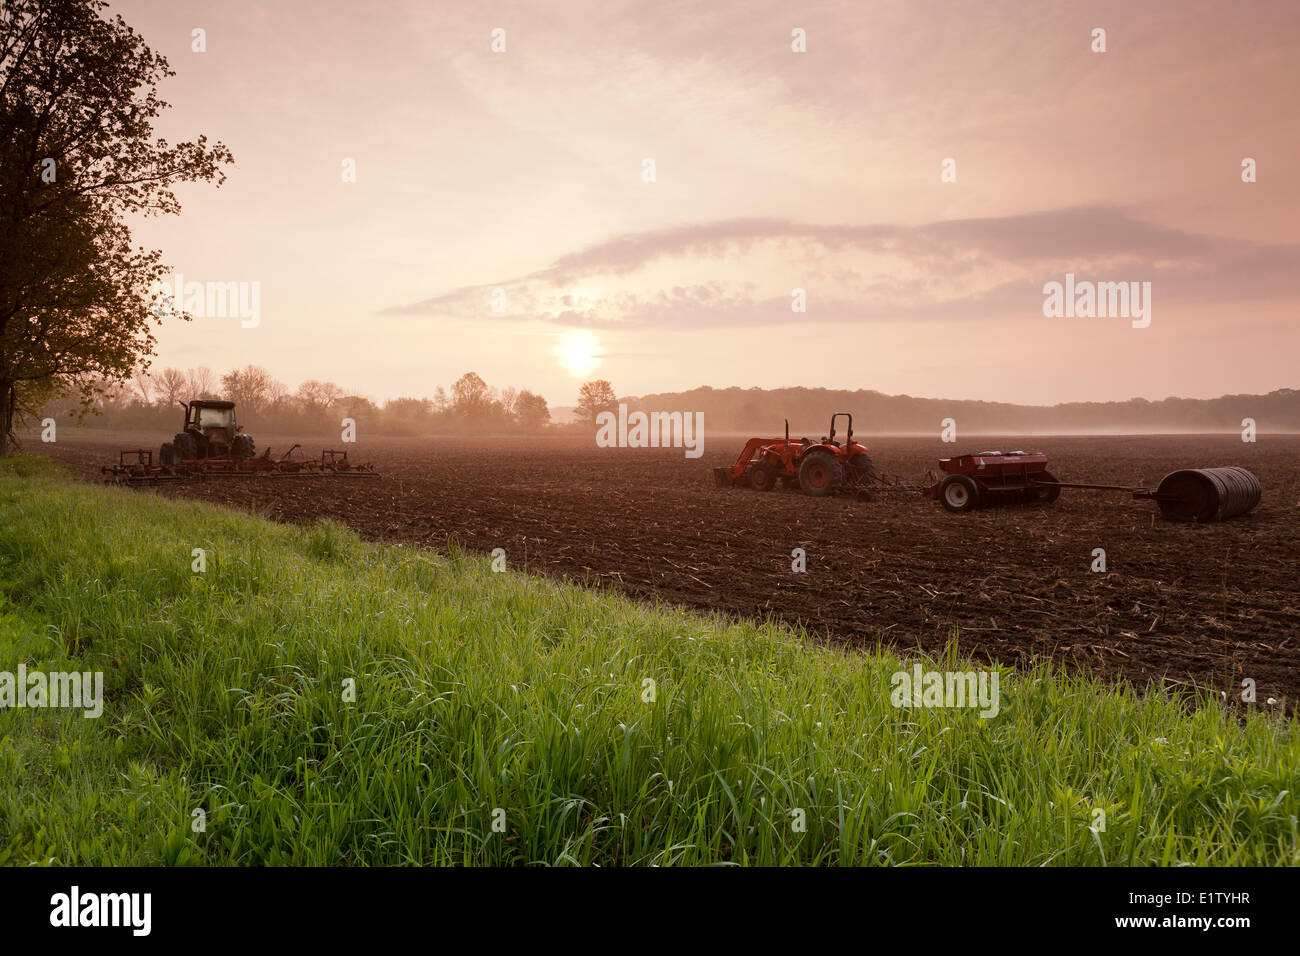 Farming equipment on a field at dawn in Prince Edward County, Ontario, Canada Stock Photo